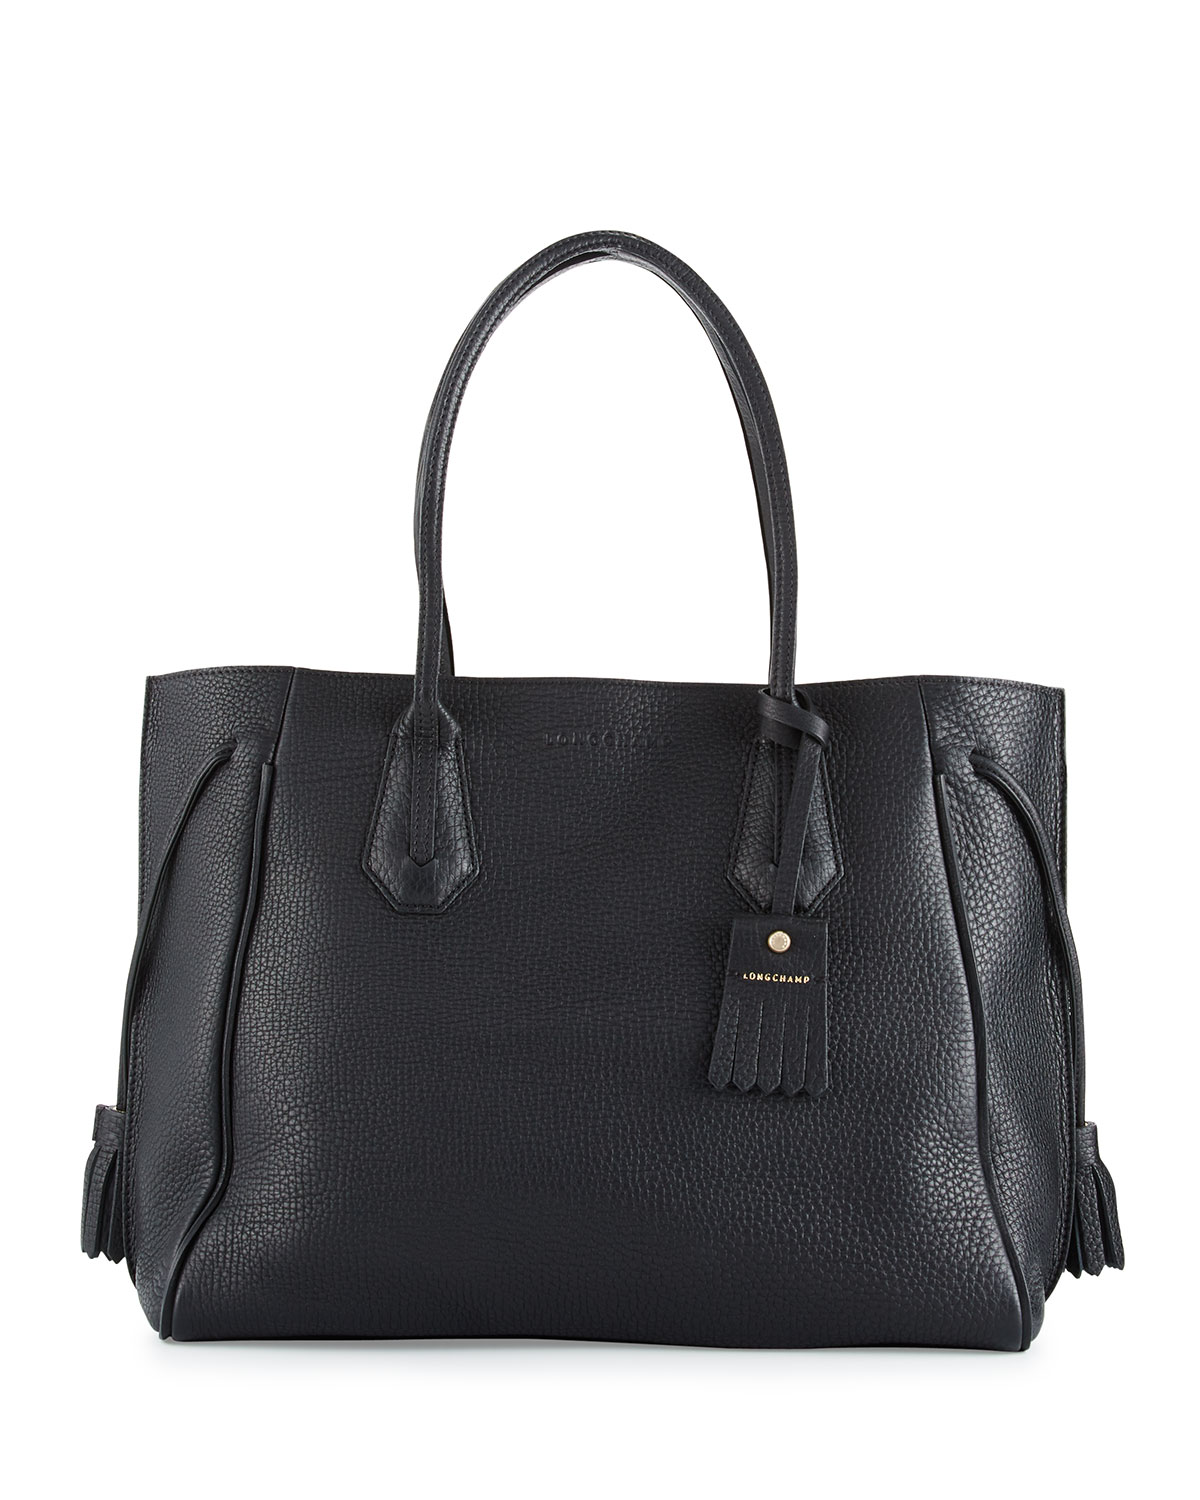 Penelope Large Leather Tote Bag